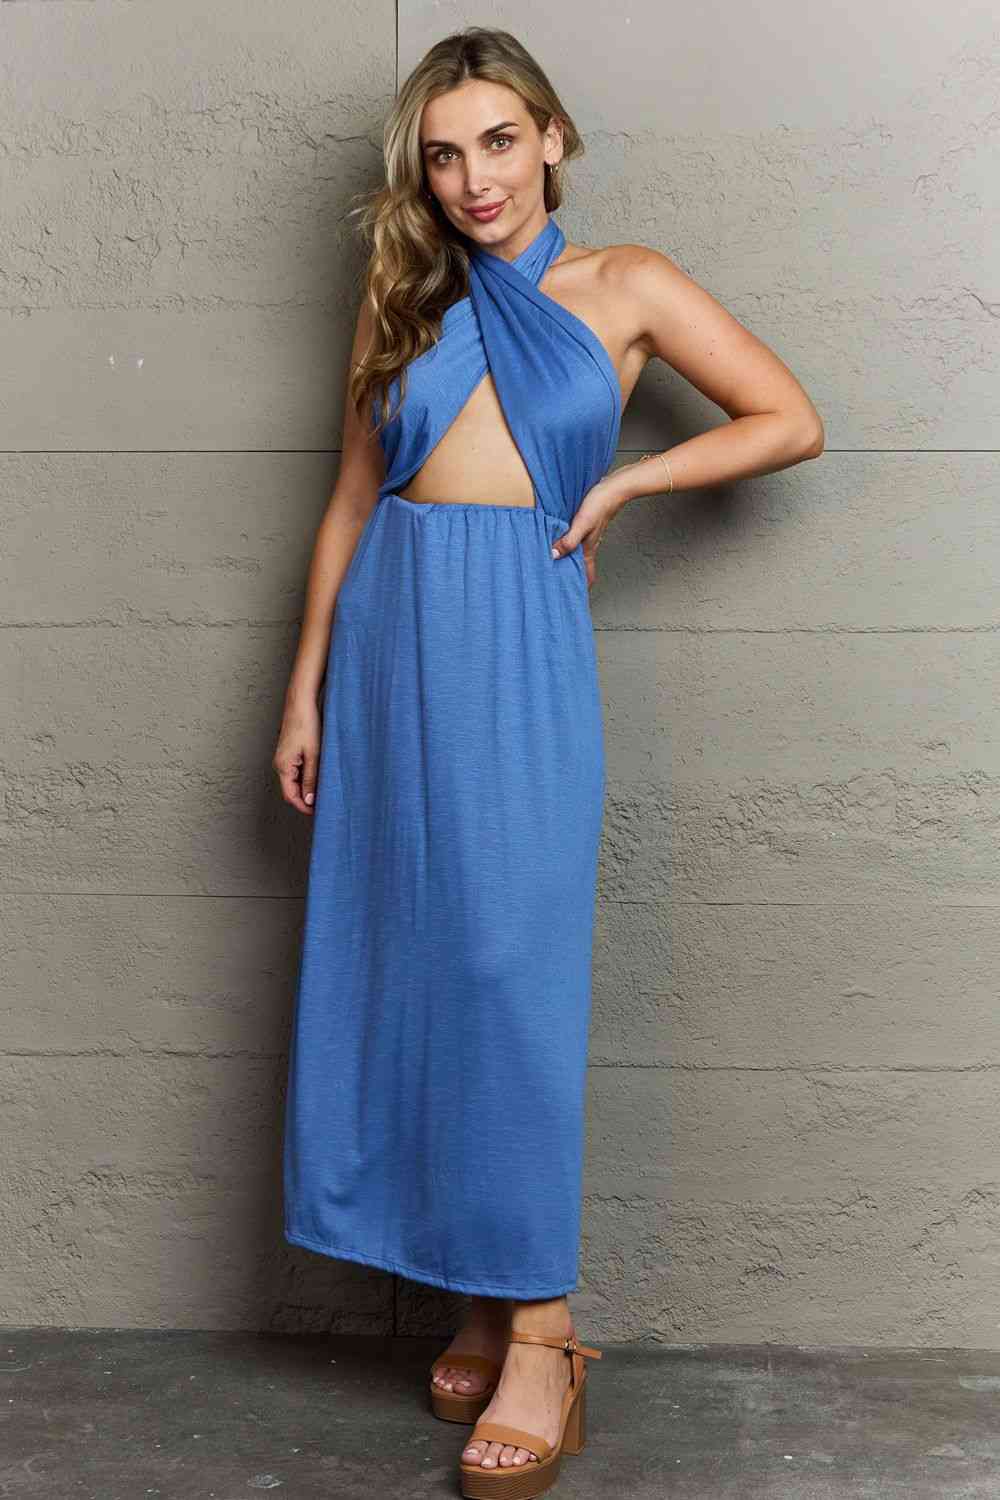 Ninexis Know Your Worth Criss Cross Halter Neck Maxi Dress - AFFORDABLE MARKET